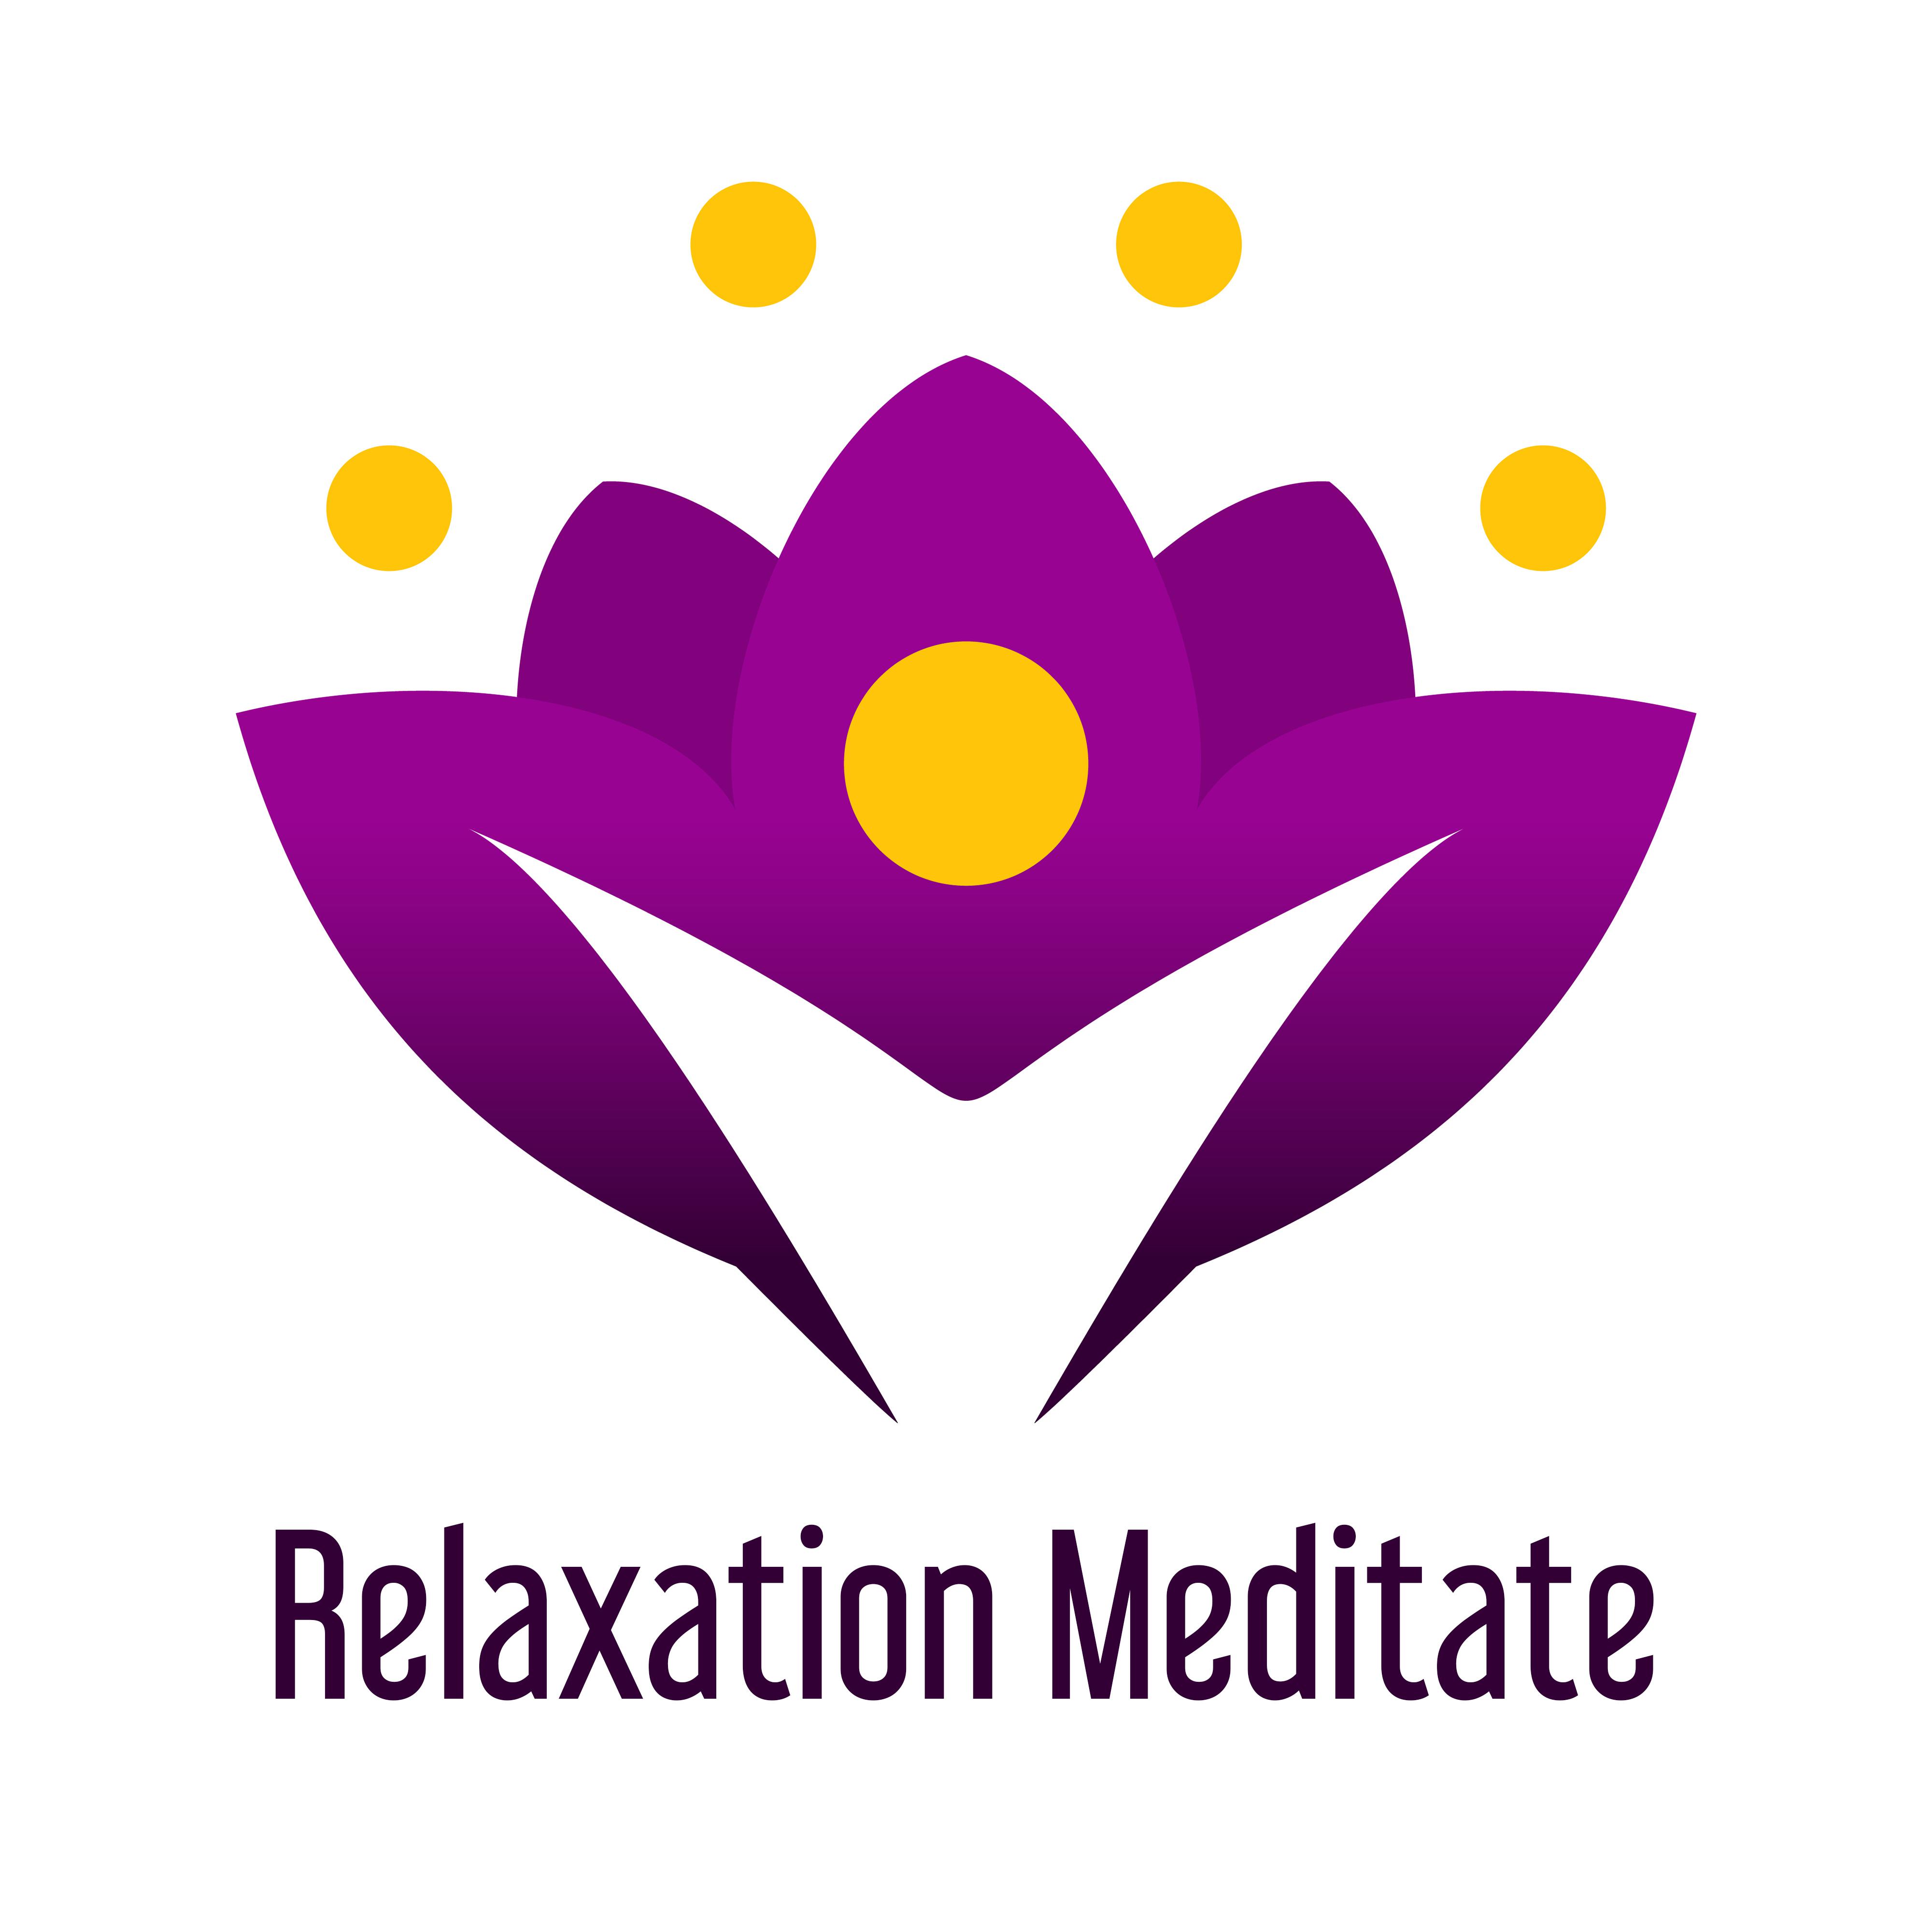 Relaxation Meditate